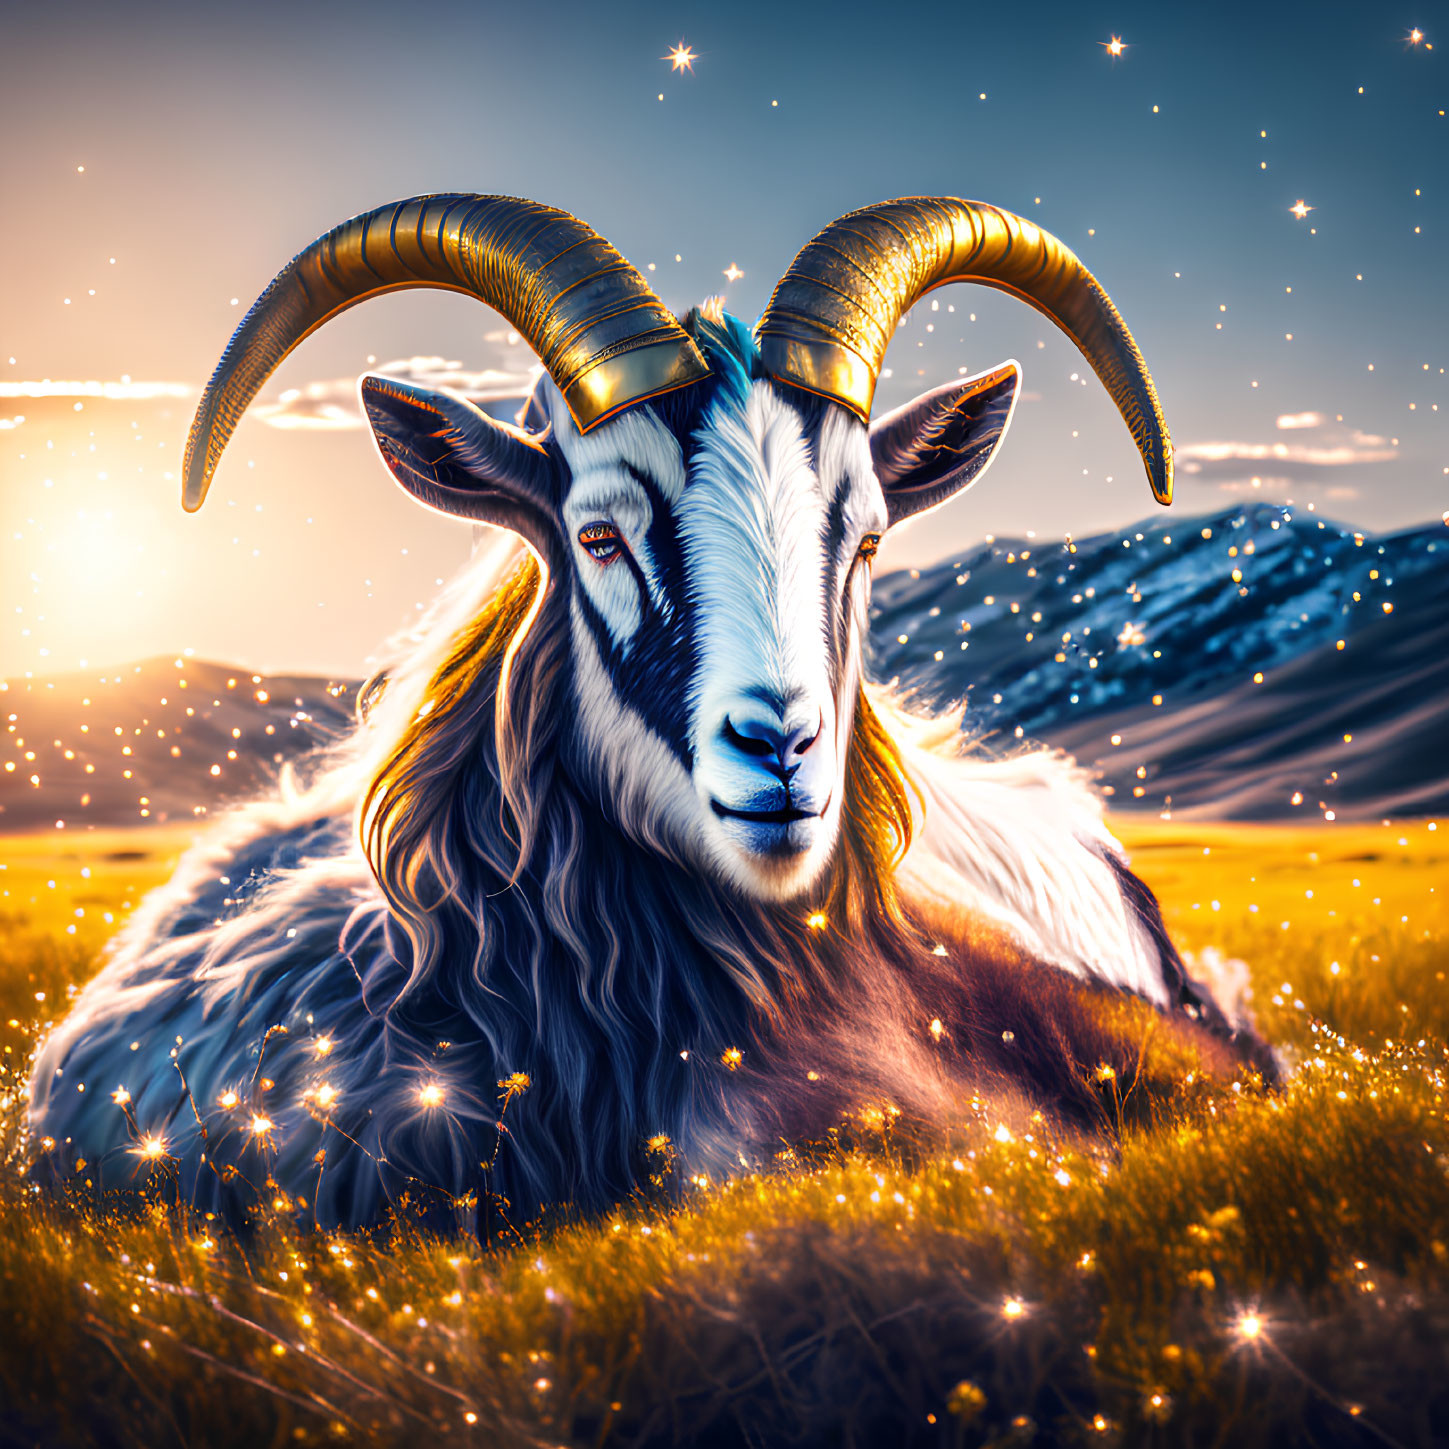 Majestic two-headed goat with golden horns in sunlit field